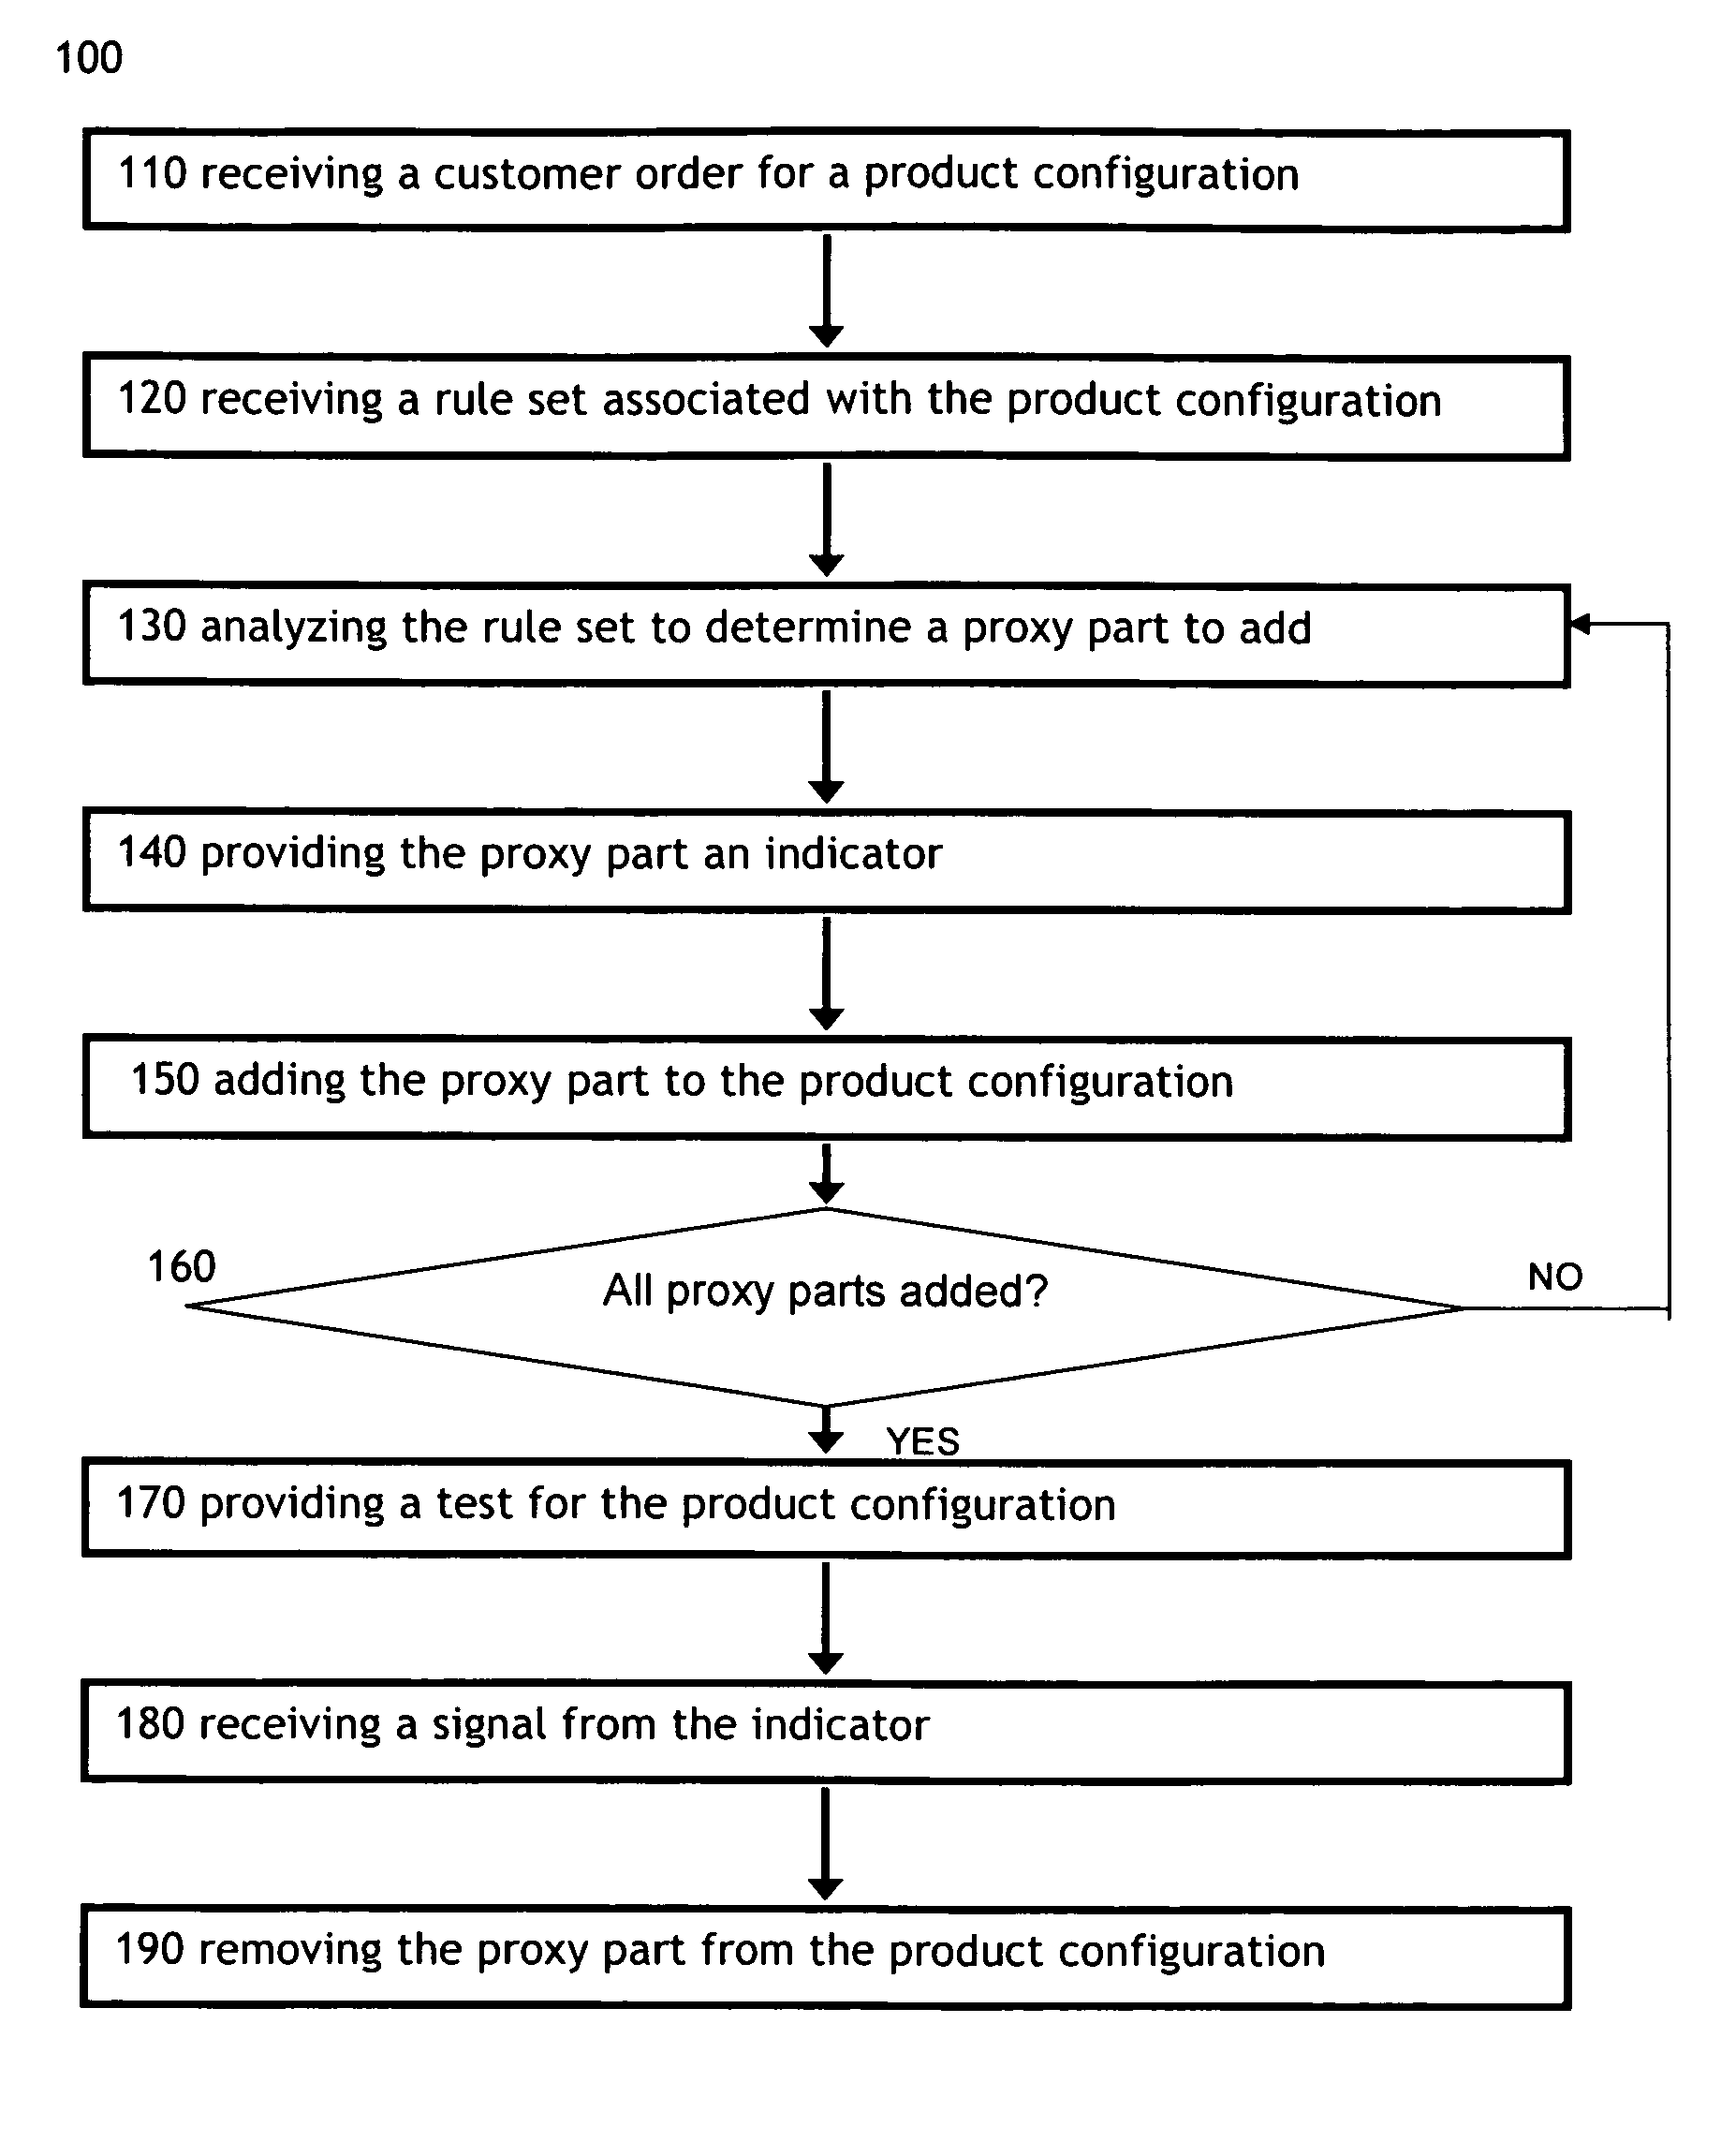 Dynamic determination of a minimal configured product to achieve desired test coverage